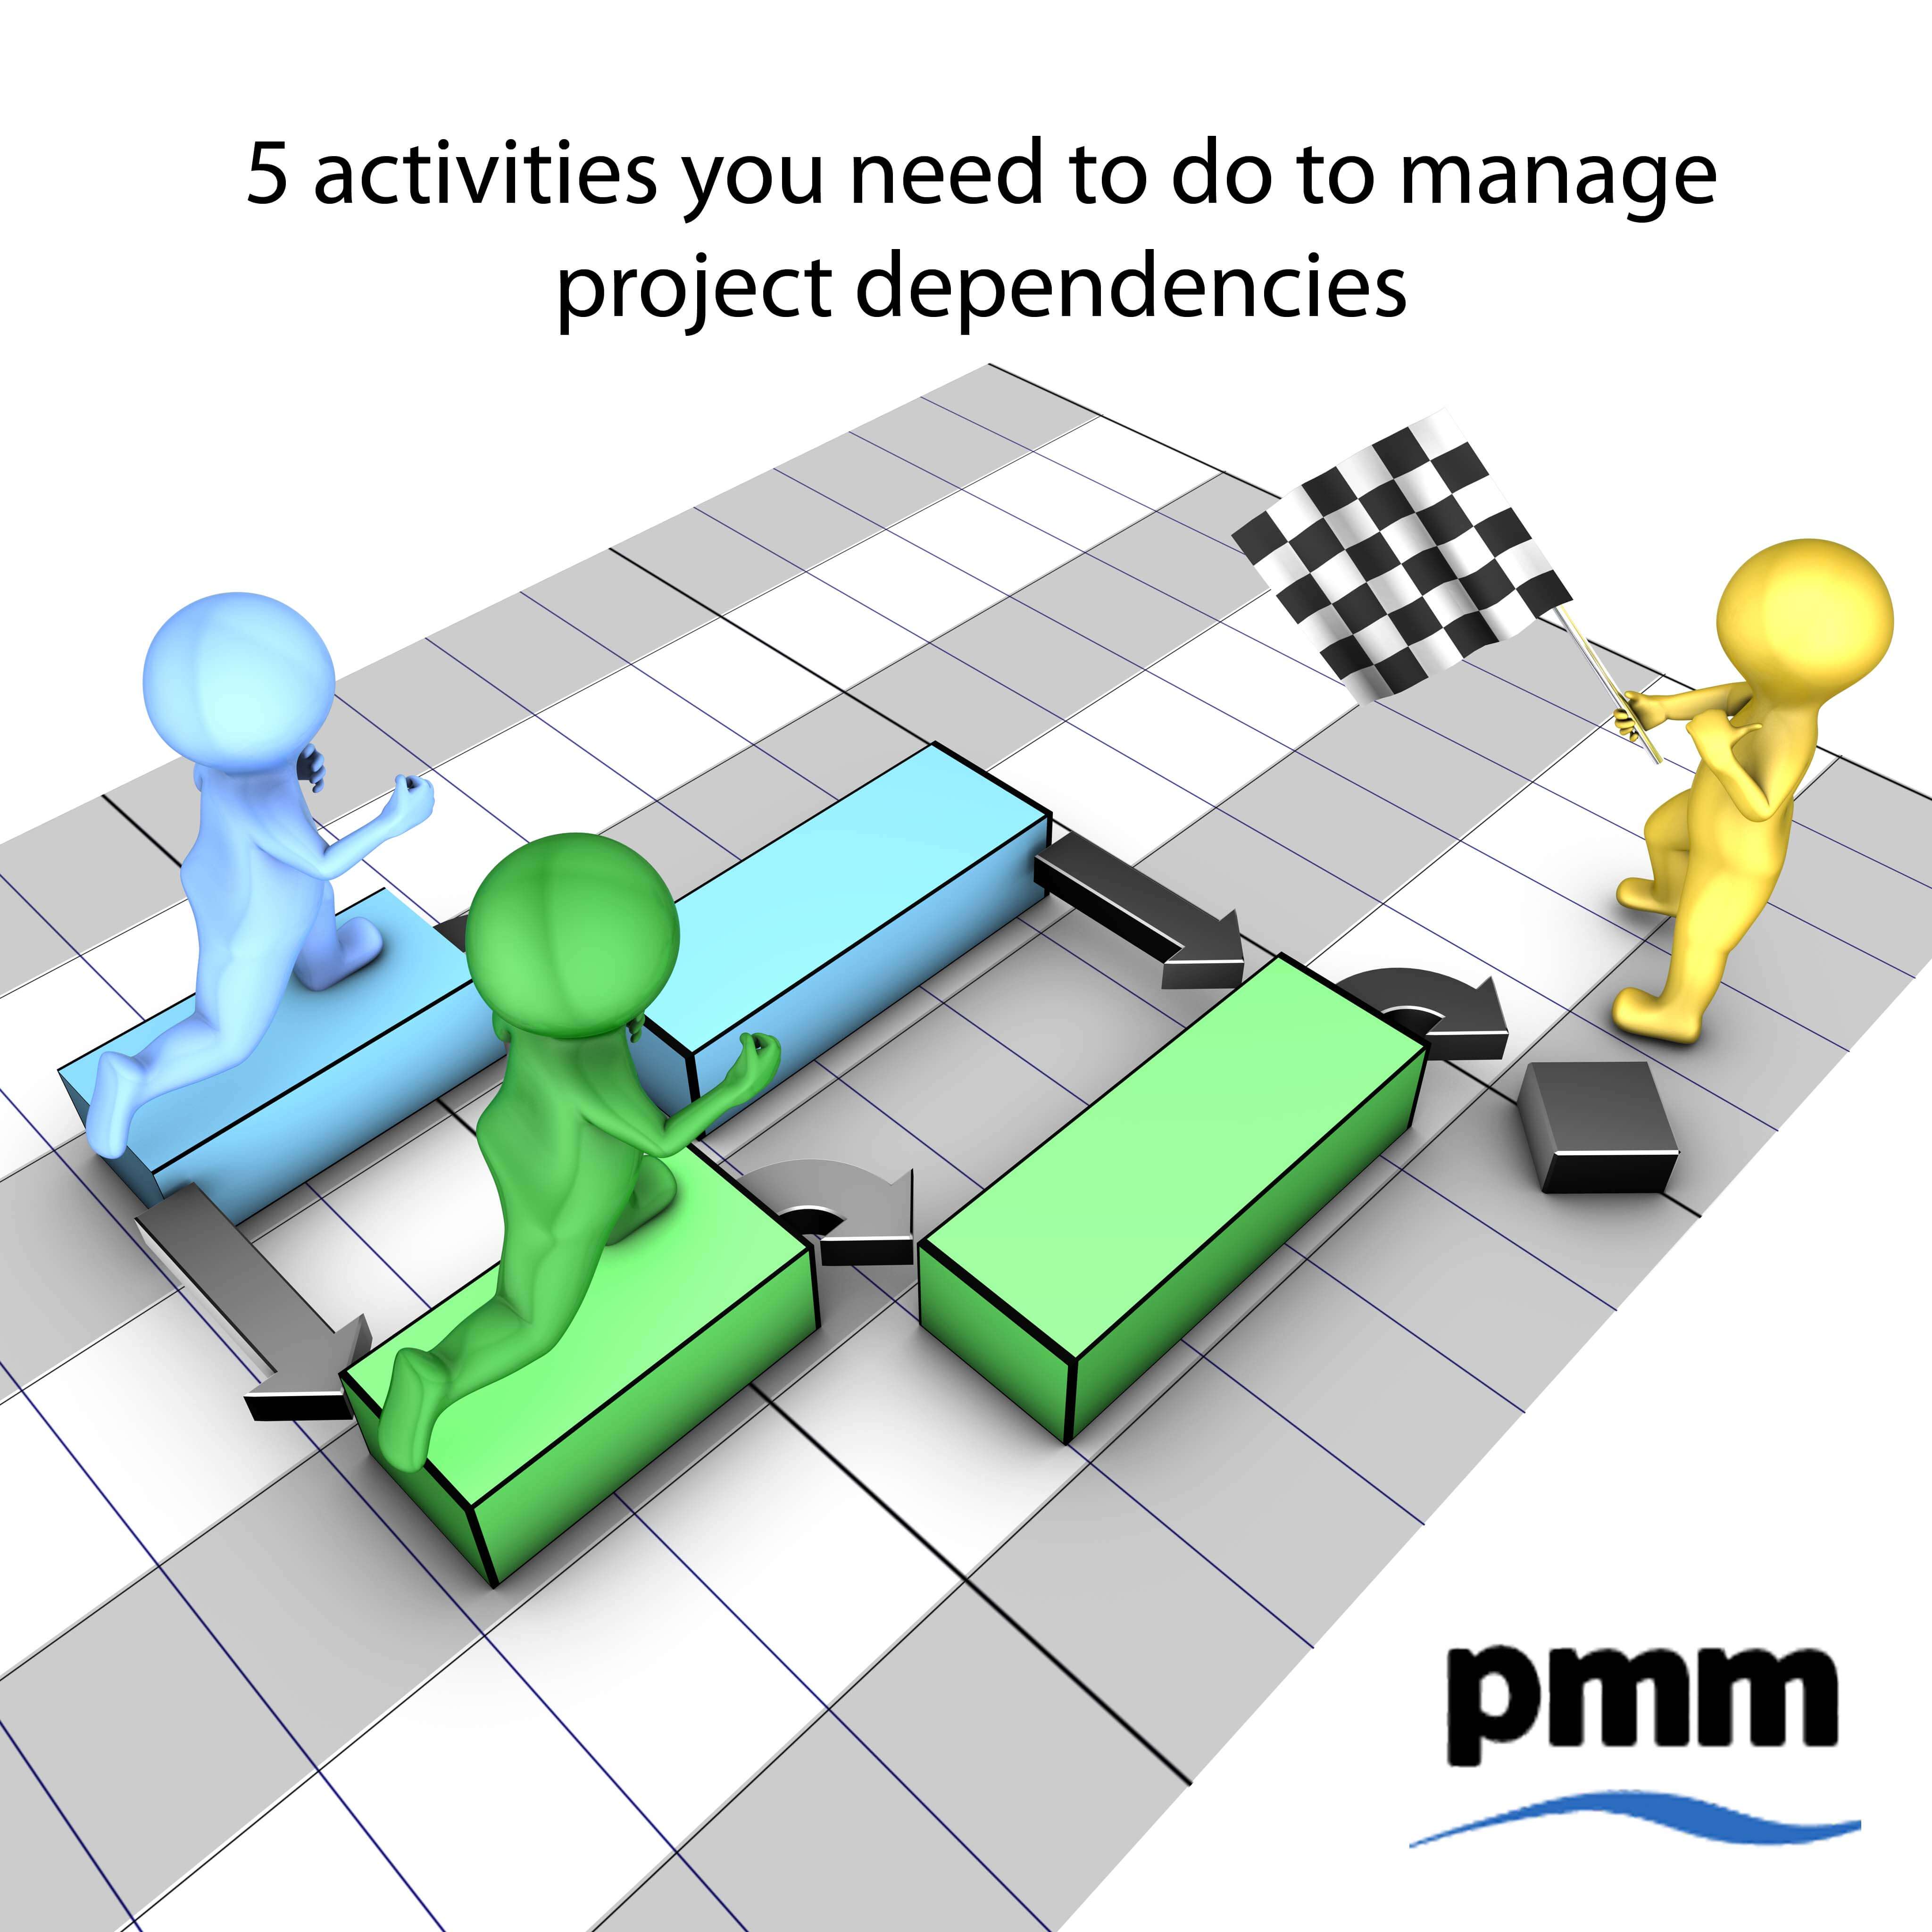 5 activities you need to manage project dependencies